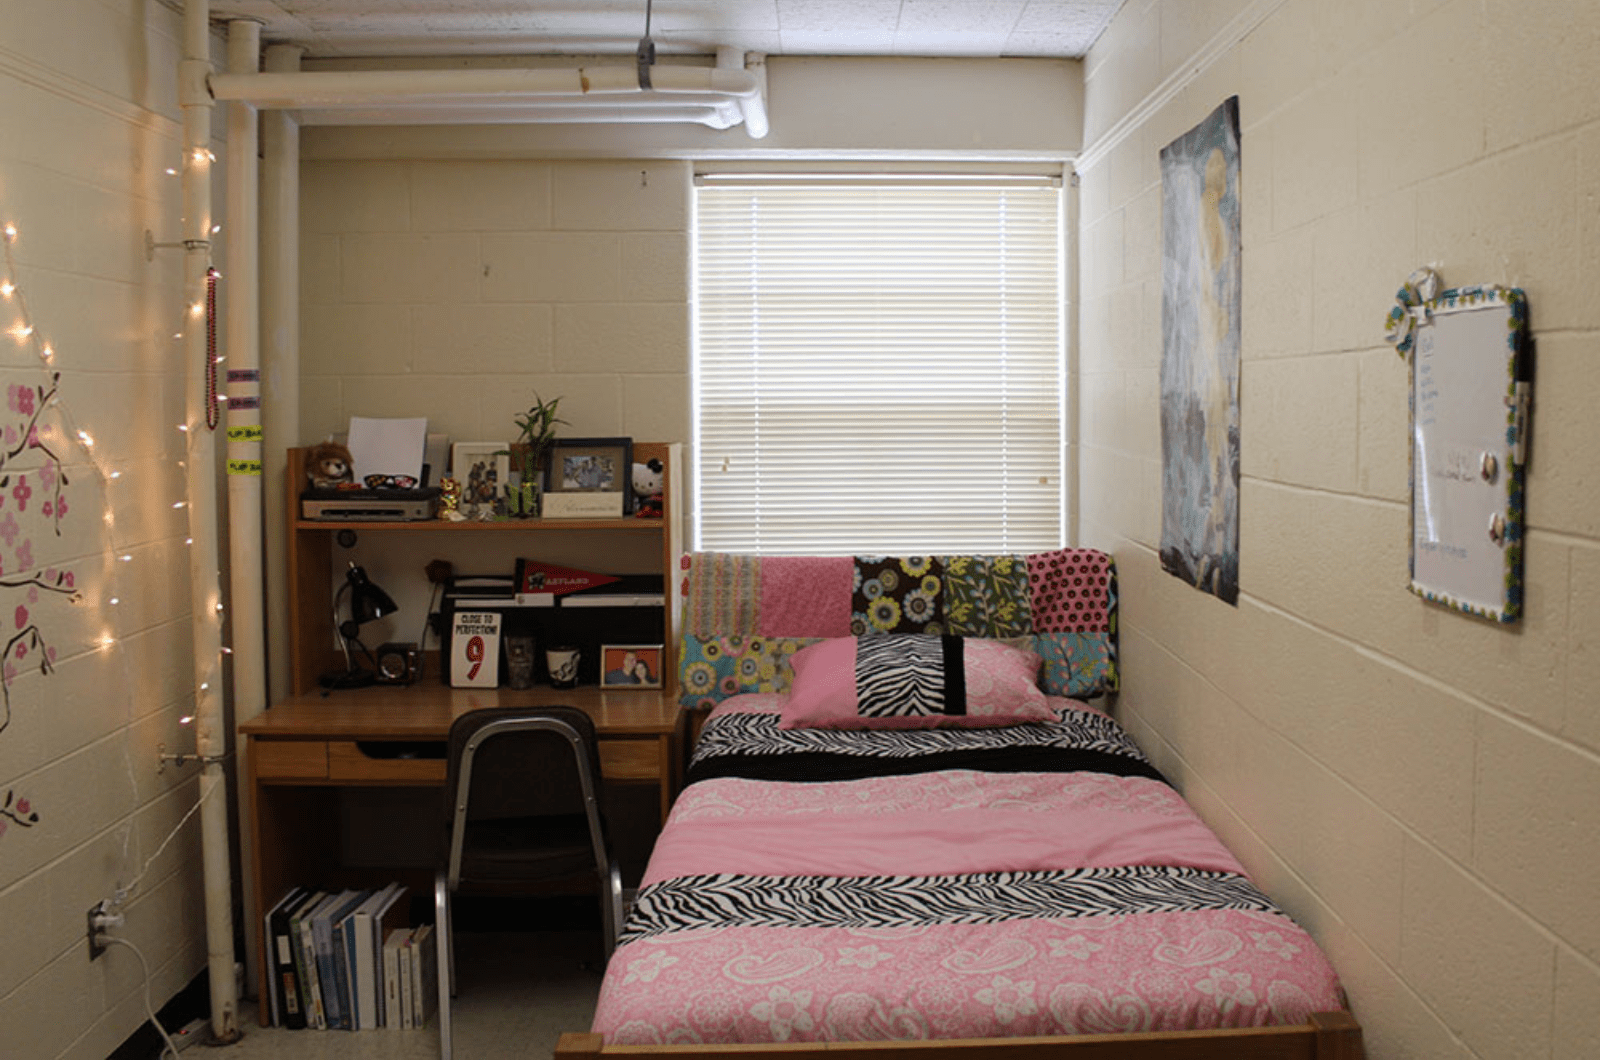 single room with a bed, pink duvet cover and desk